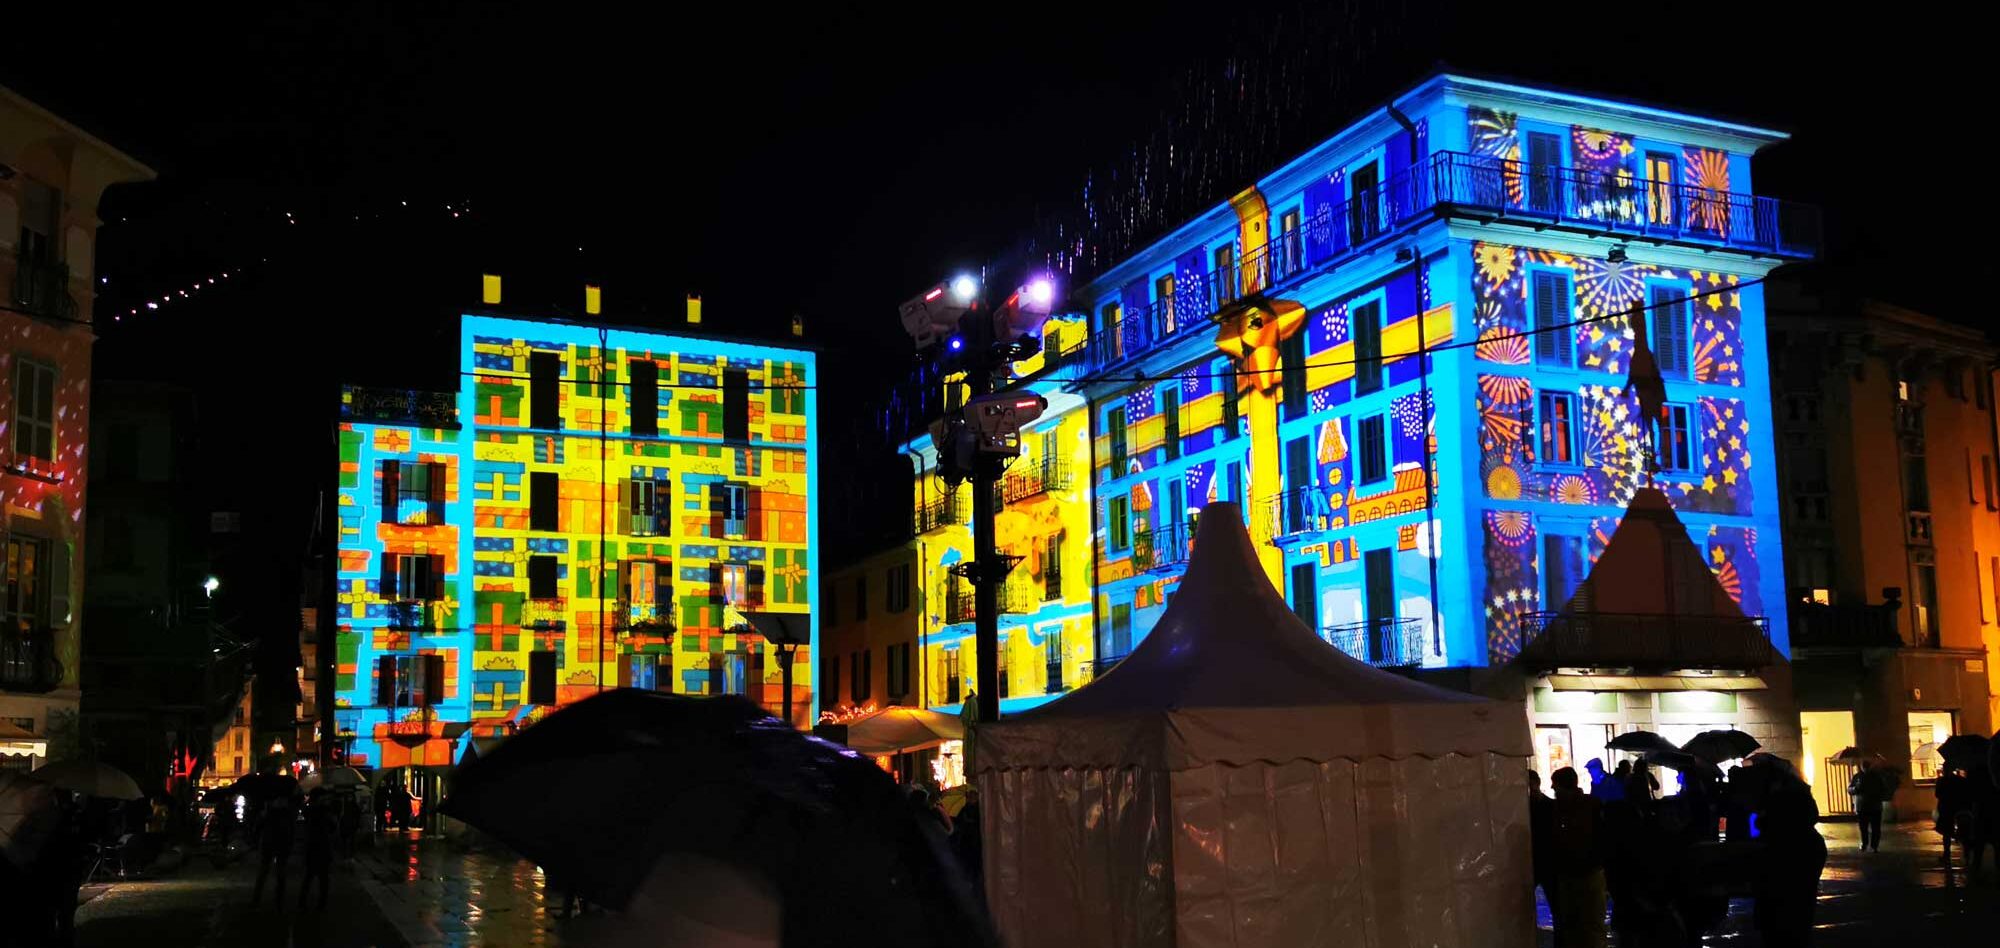 Christmas atmosphere in the city with mapping projections